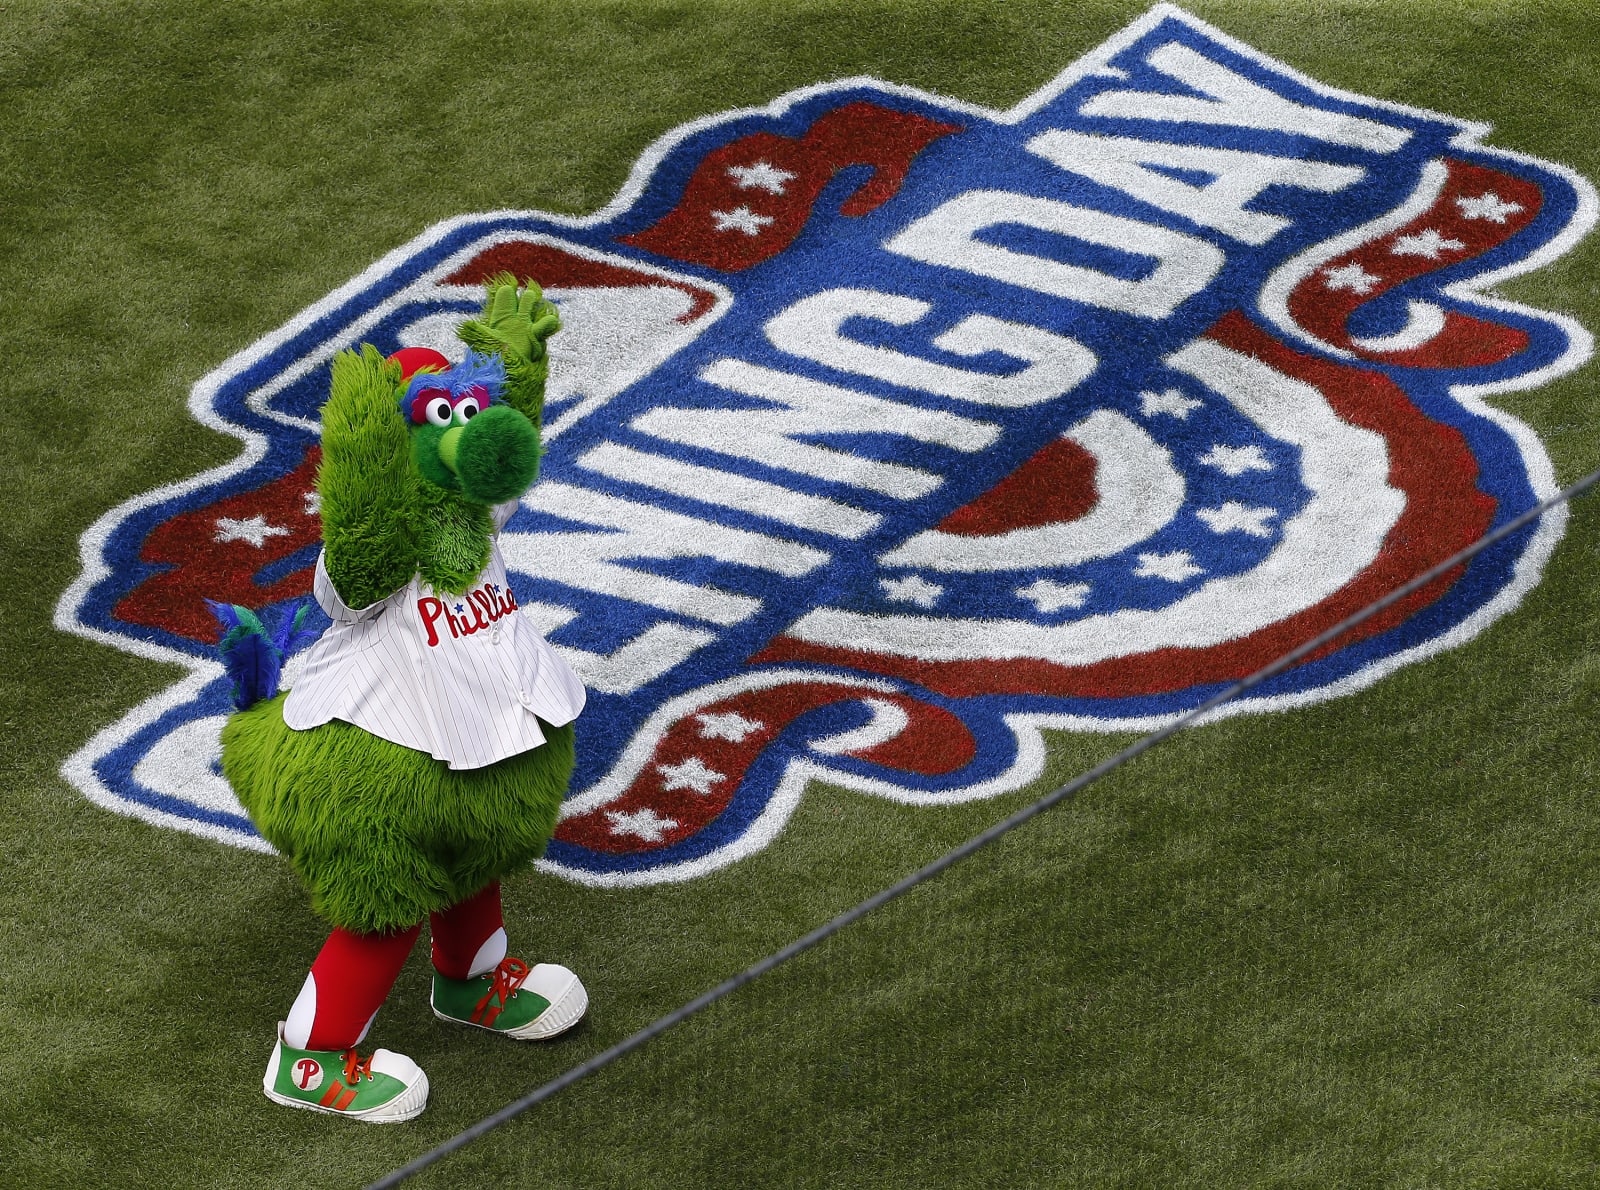 Phillies Ranking the best opening day lineups of 2010s